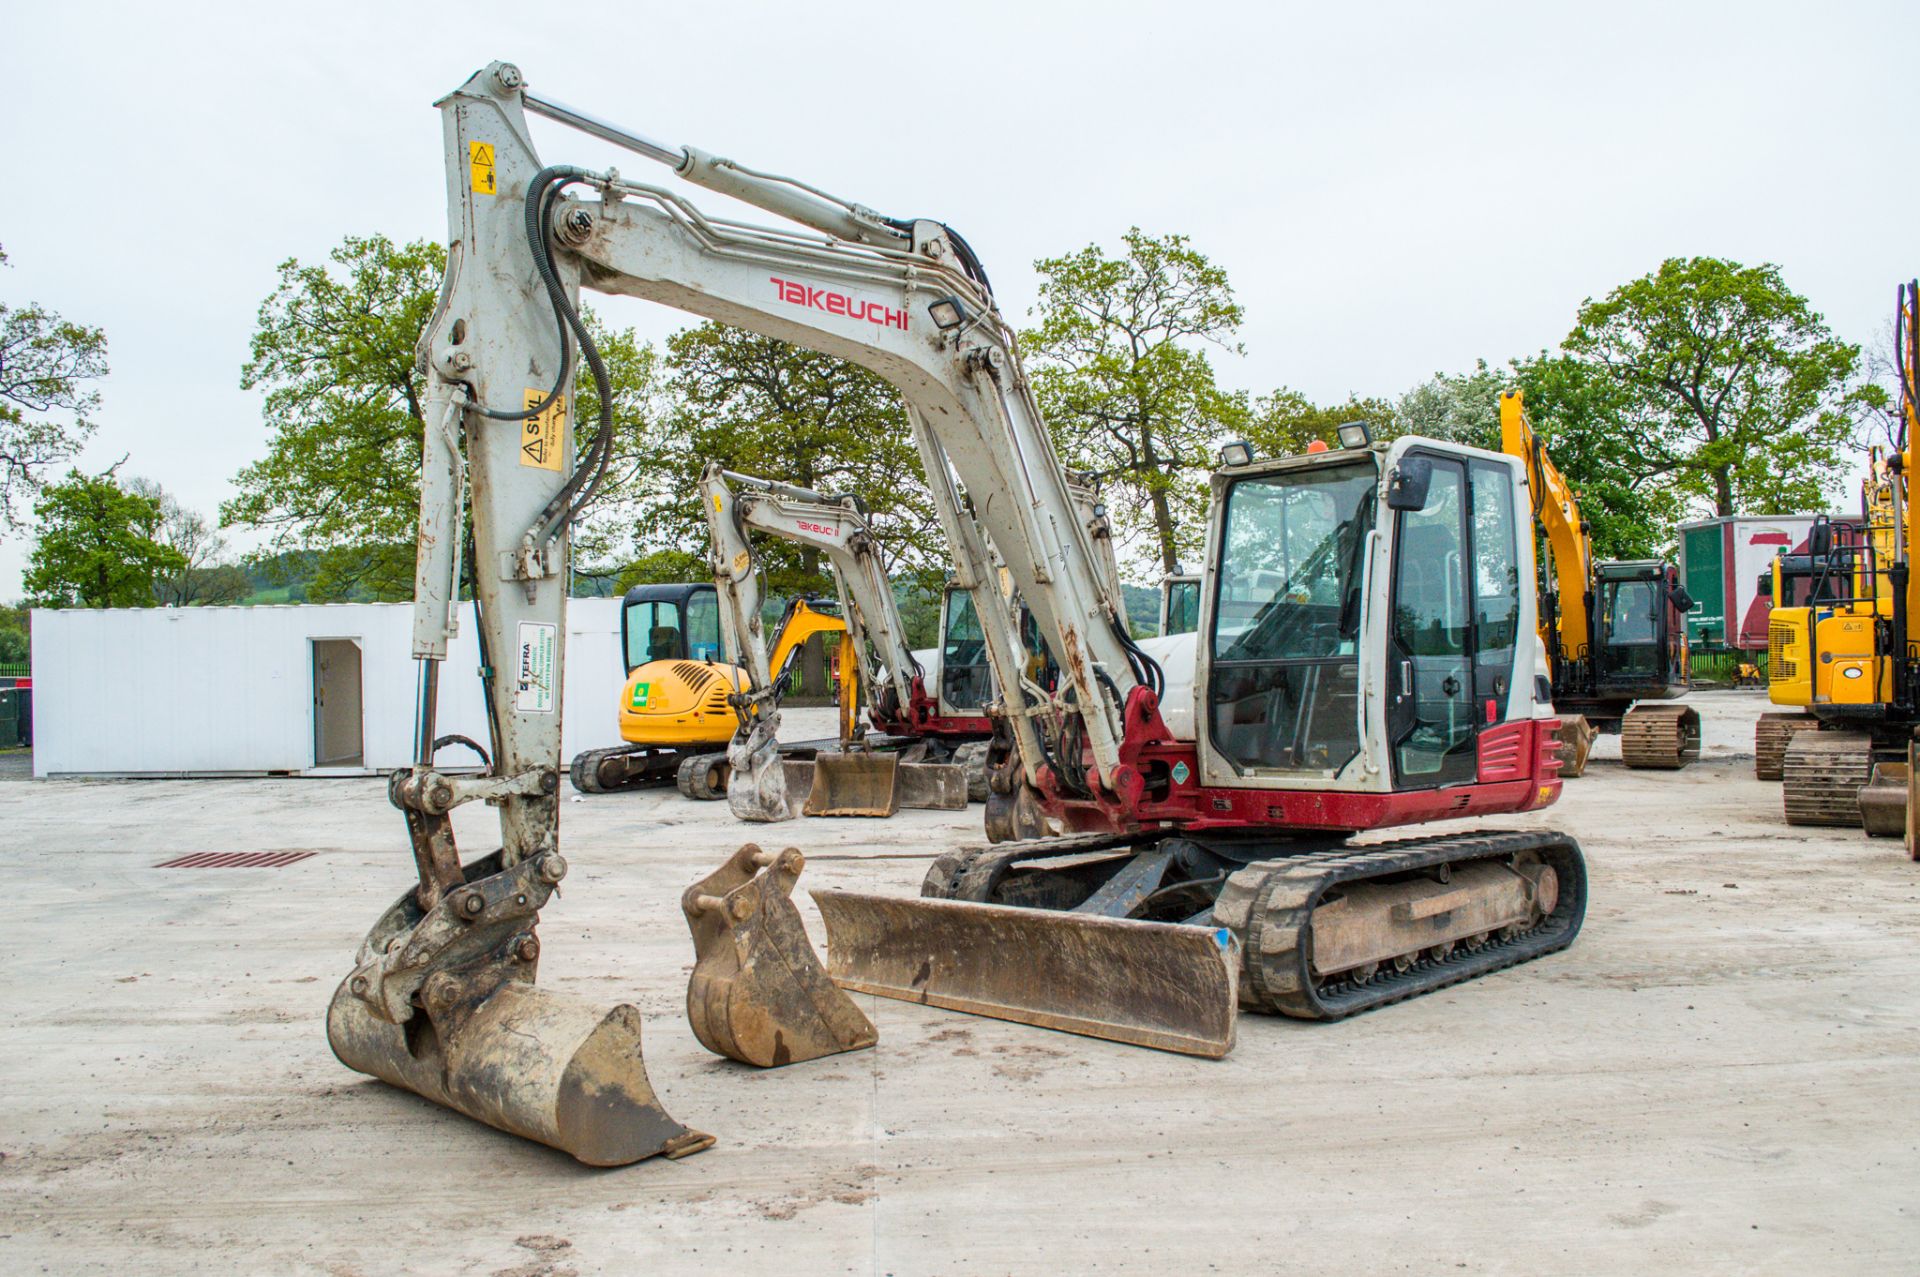 Takeuchi TB290 8.5 tonne rubber tracked excavator Year: 2016 S/N: 200438 Recorded Hours: 6945 Air